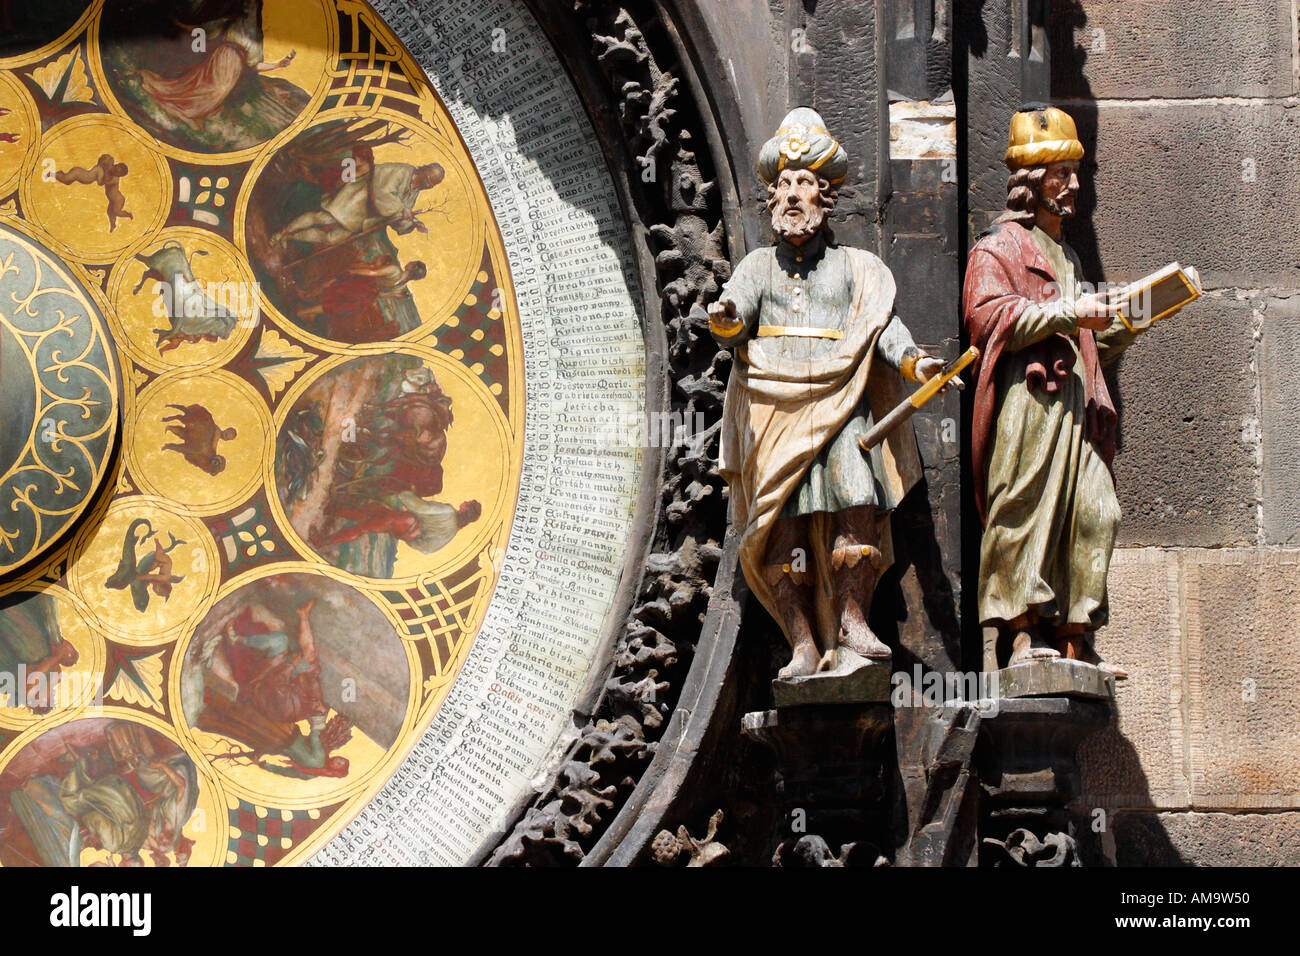 Prague Astronomical Clock detail of figures and signs of the zodiac Old Town Square Prague Czech Republic Eastern Europe Stock Photo